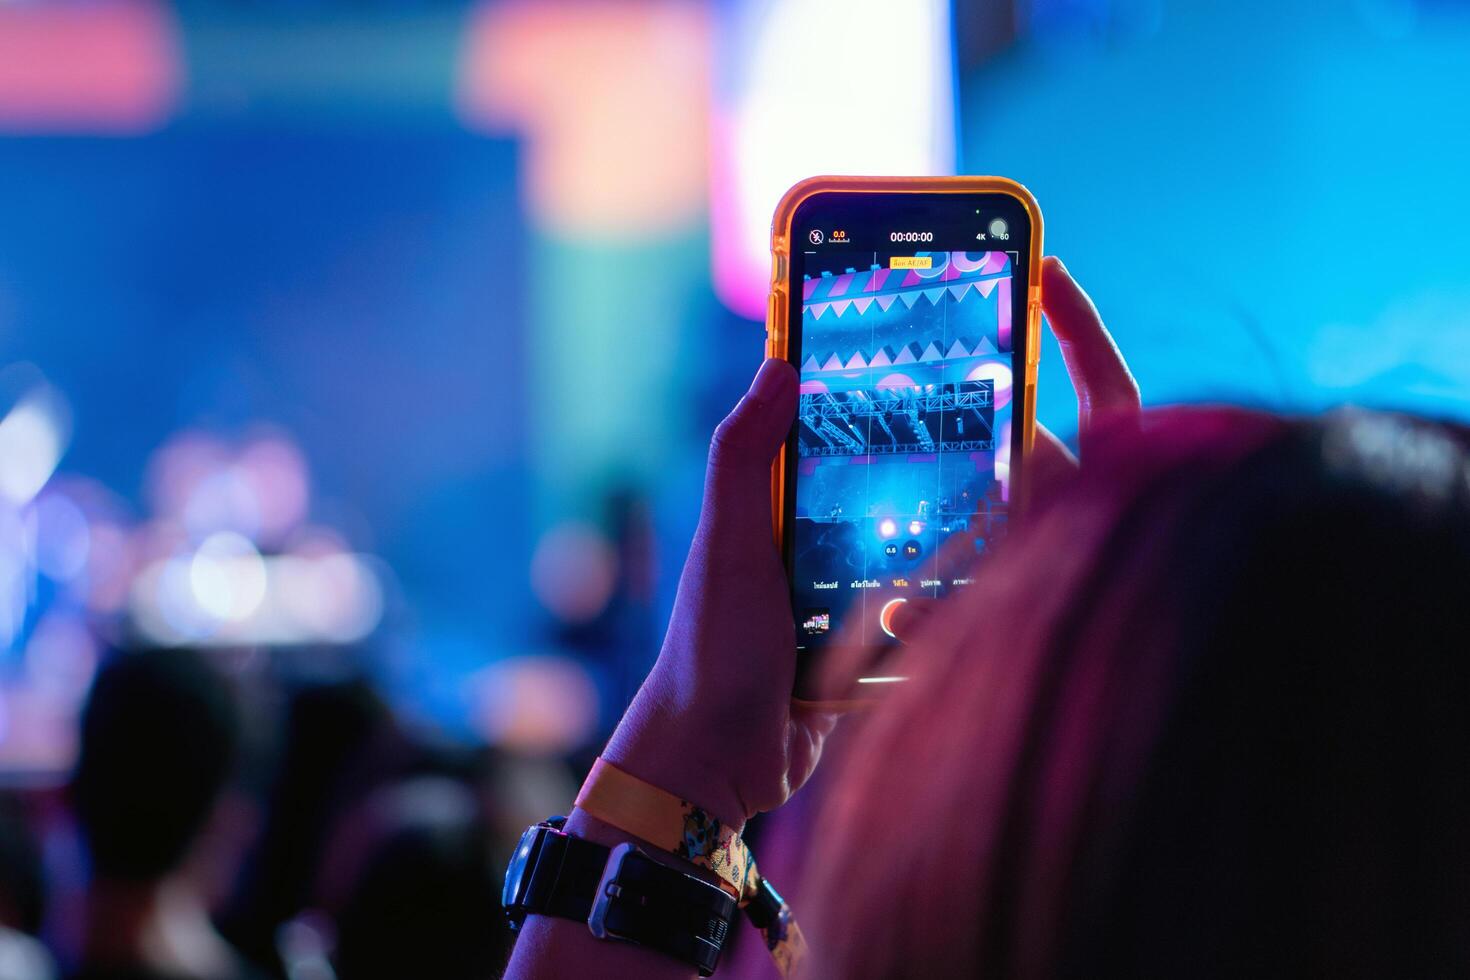 People holding smart phone and recording and photographing in music festival concert photo